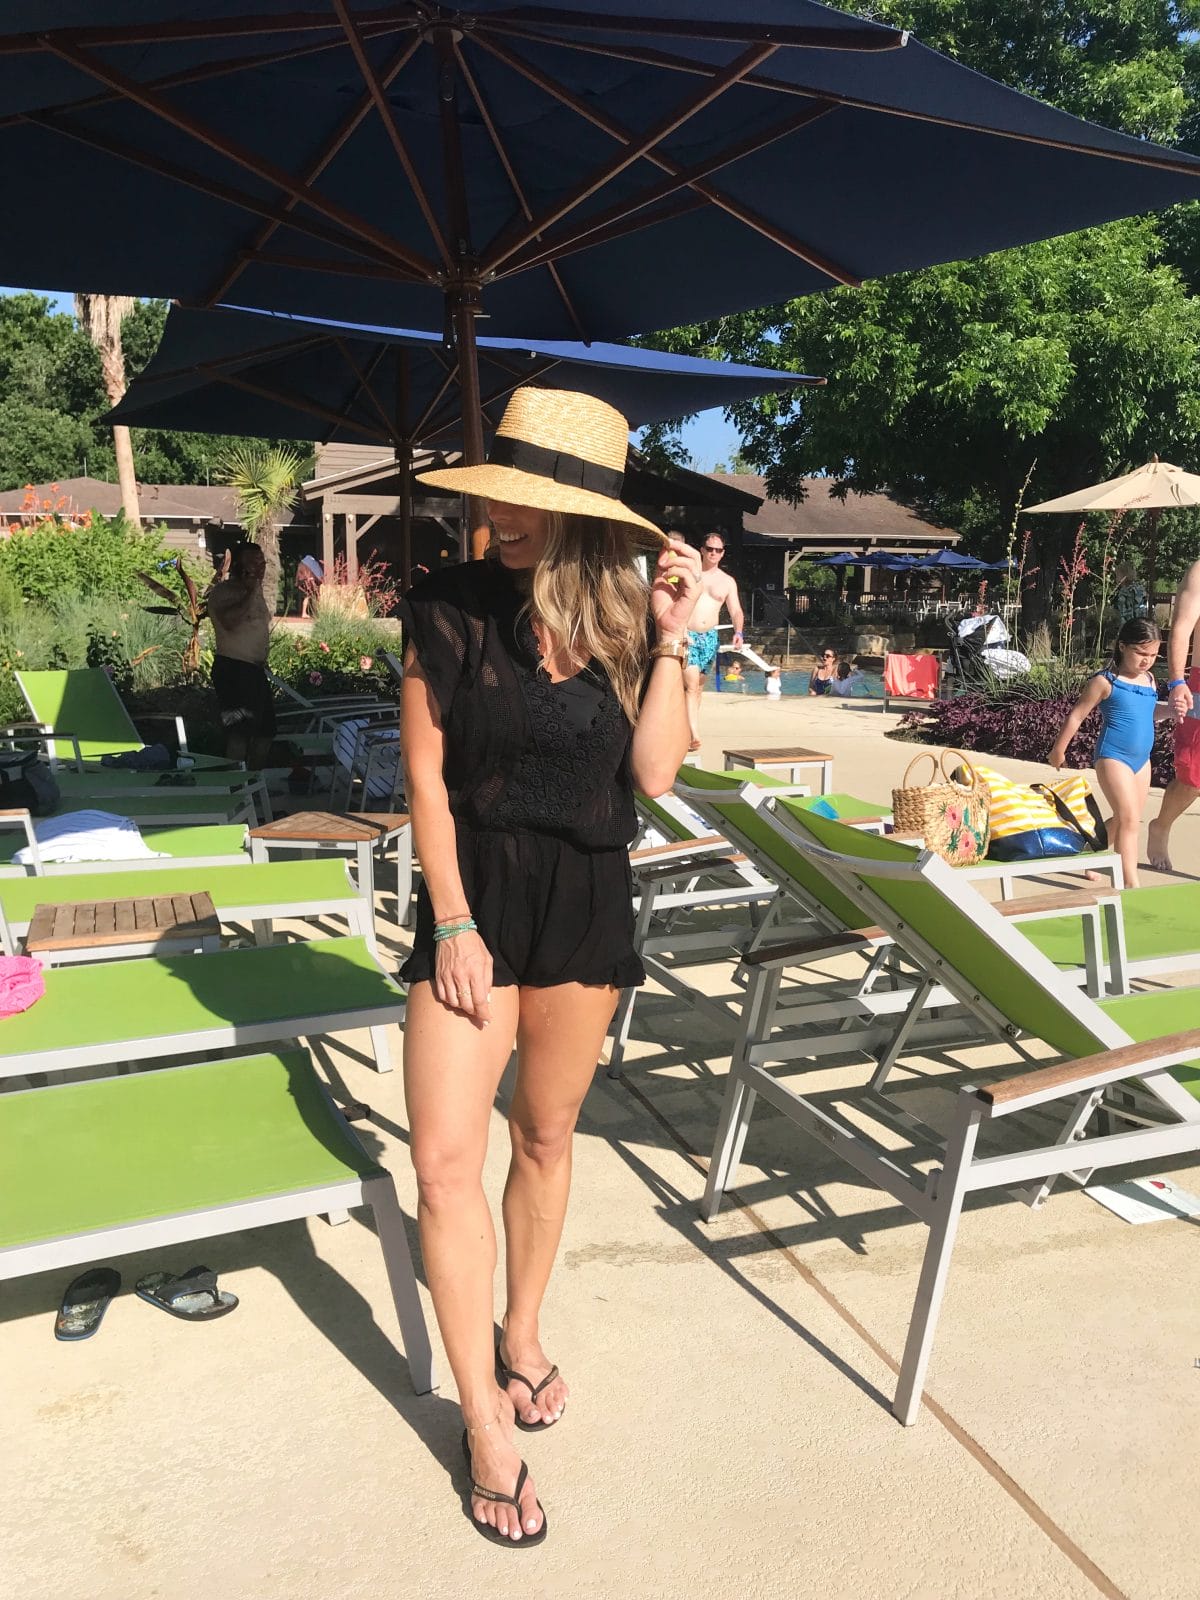 Swimsuit coverup with straw hat and flip flops